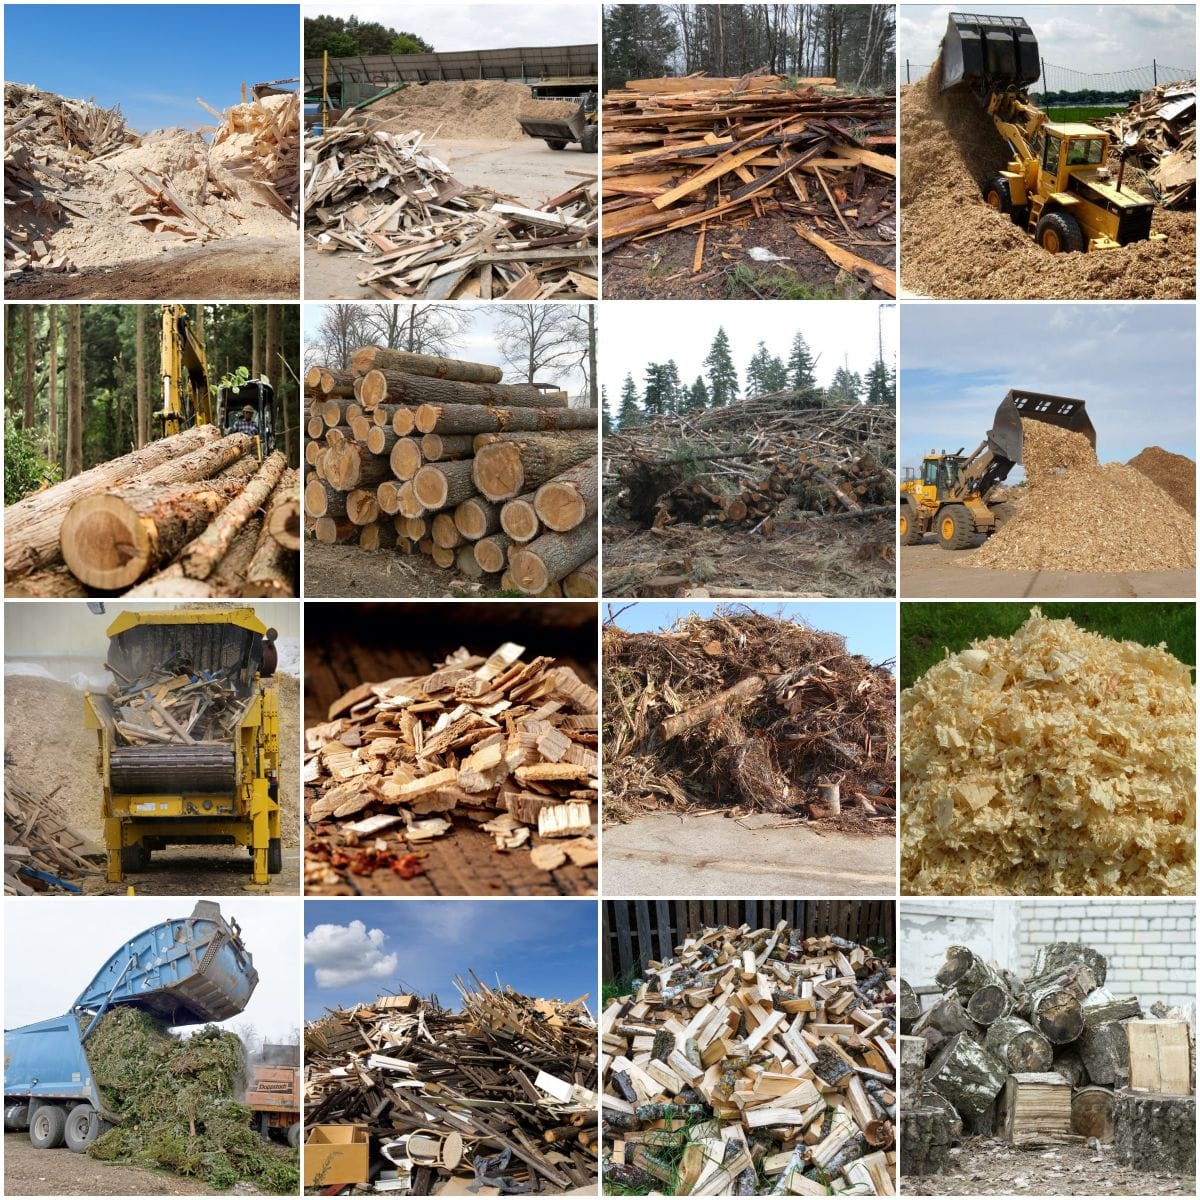 Applicable raw materials